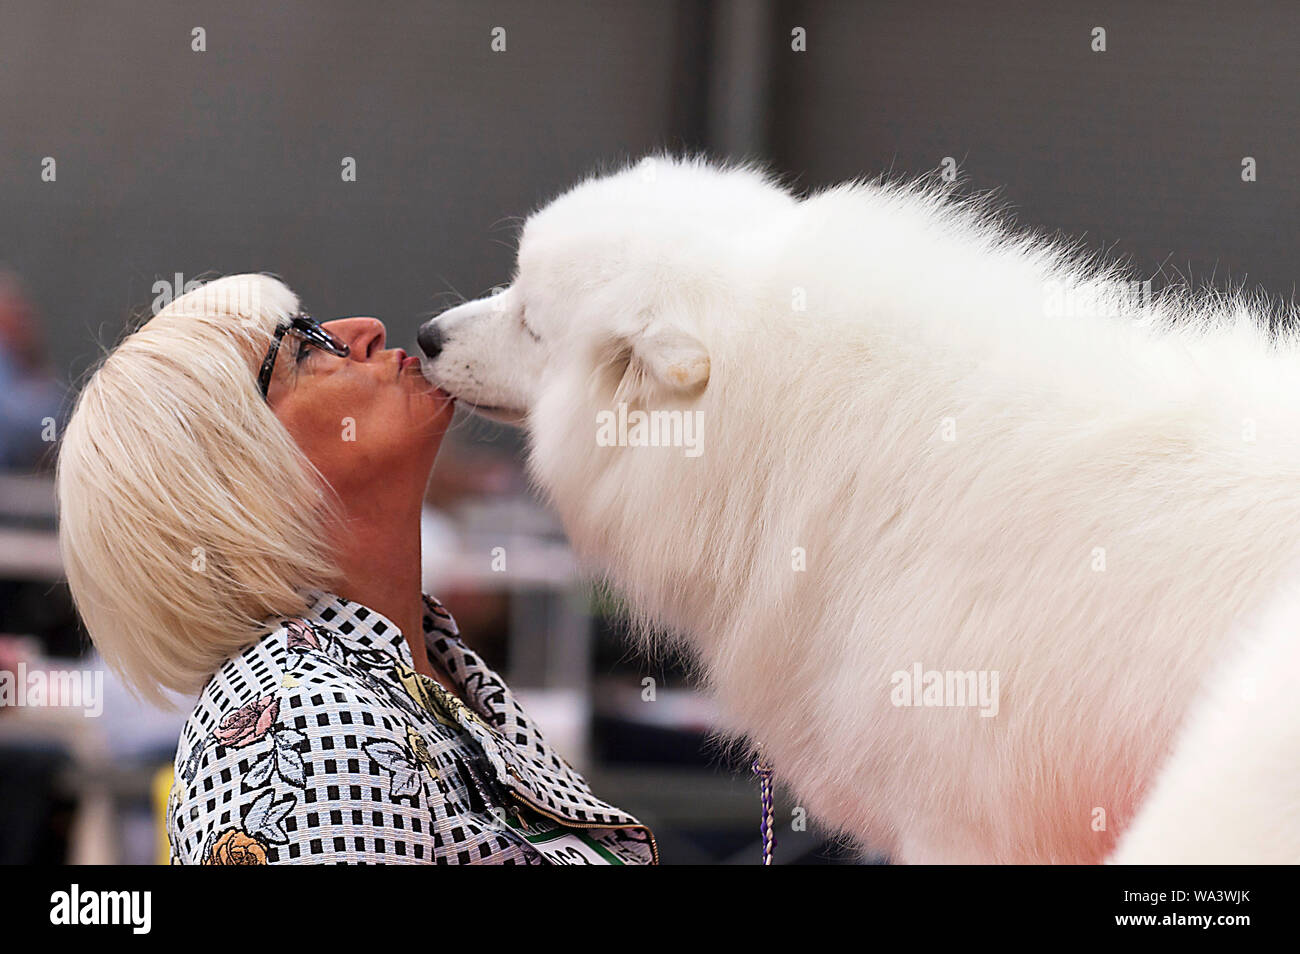 Llanelwedd, Powys, UK. 17th August 2018. A Samoyed shows affection. Judging  of Working, Pastoral and Terriers takes place on the second day of The  Welsh Kennel Club Dog Show, held at the